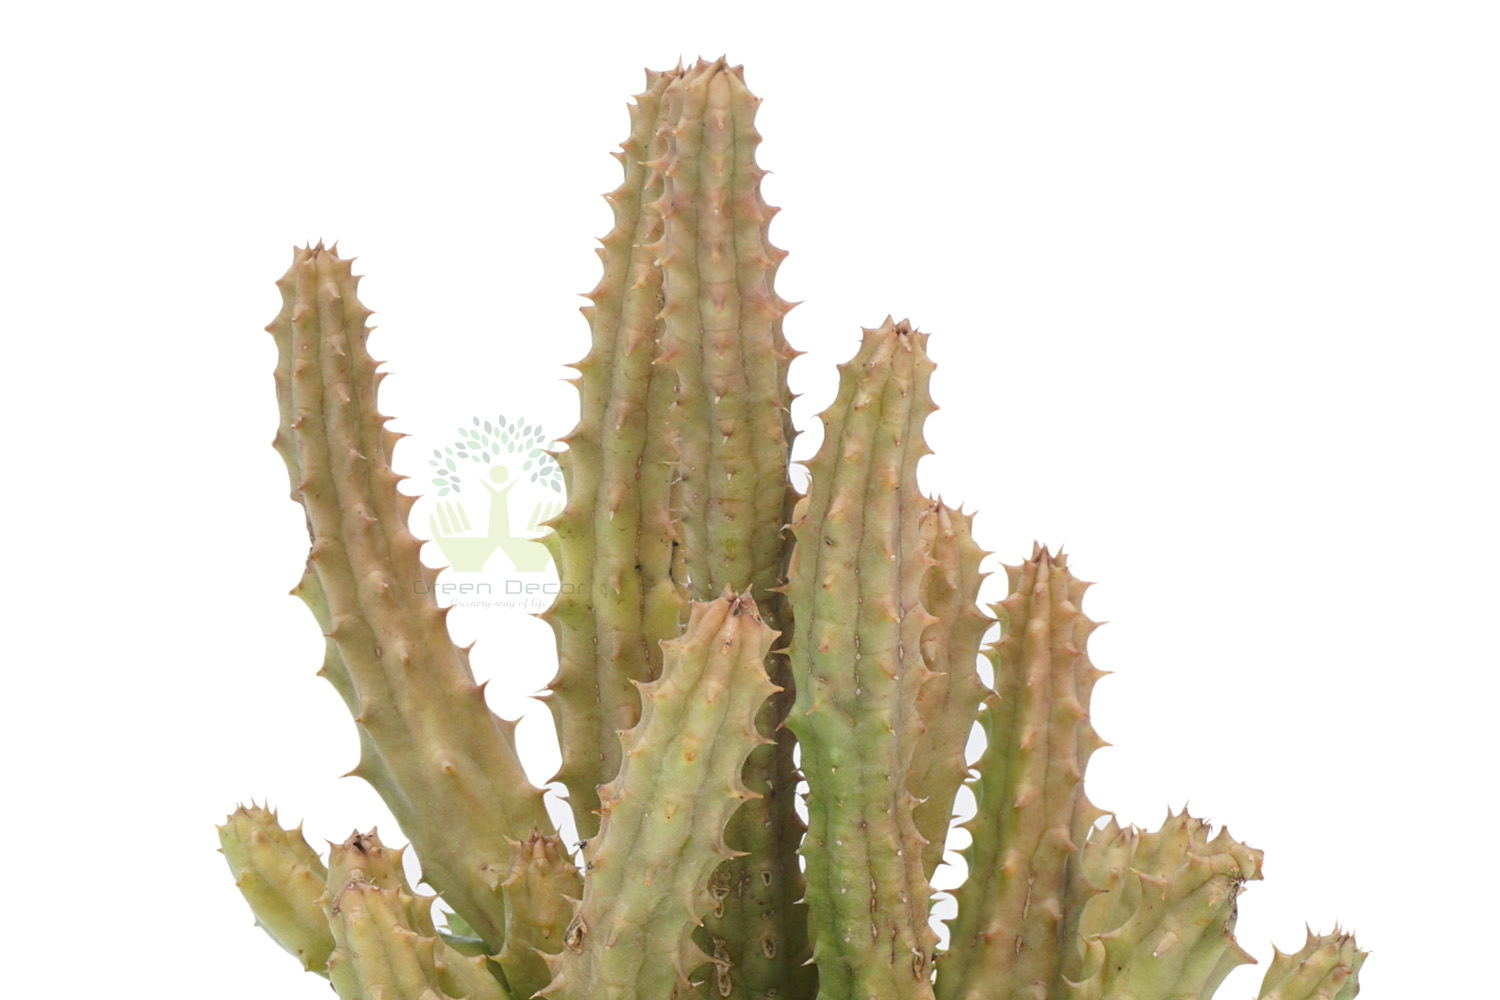 Buy Huernia Schneideriana Plants , White Pots and seeds in Delhi NCR by the best online nursery shop Greendecor.